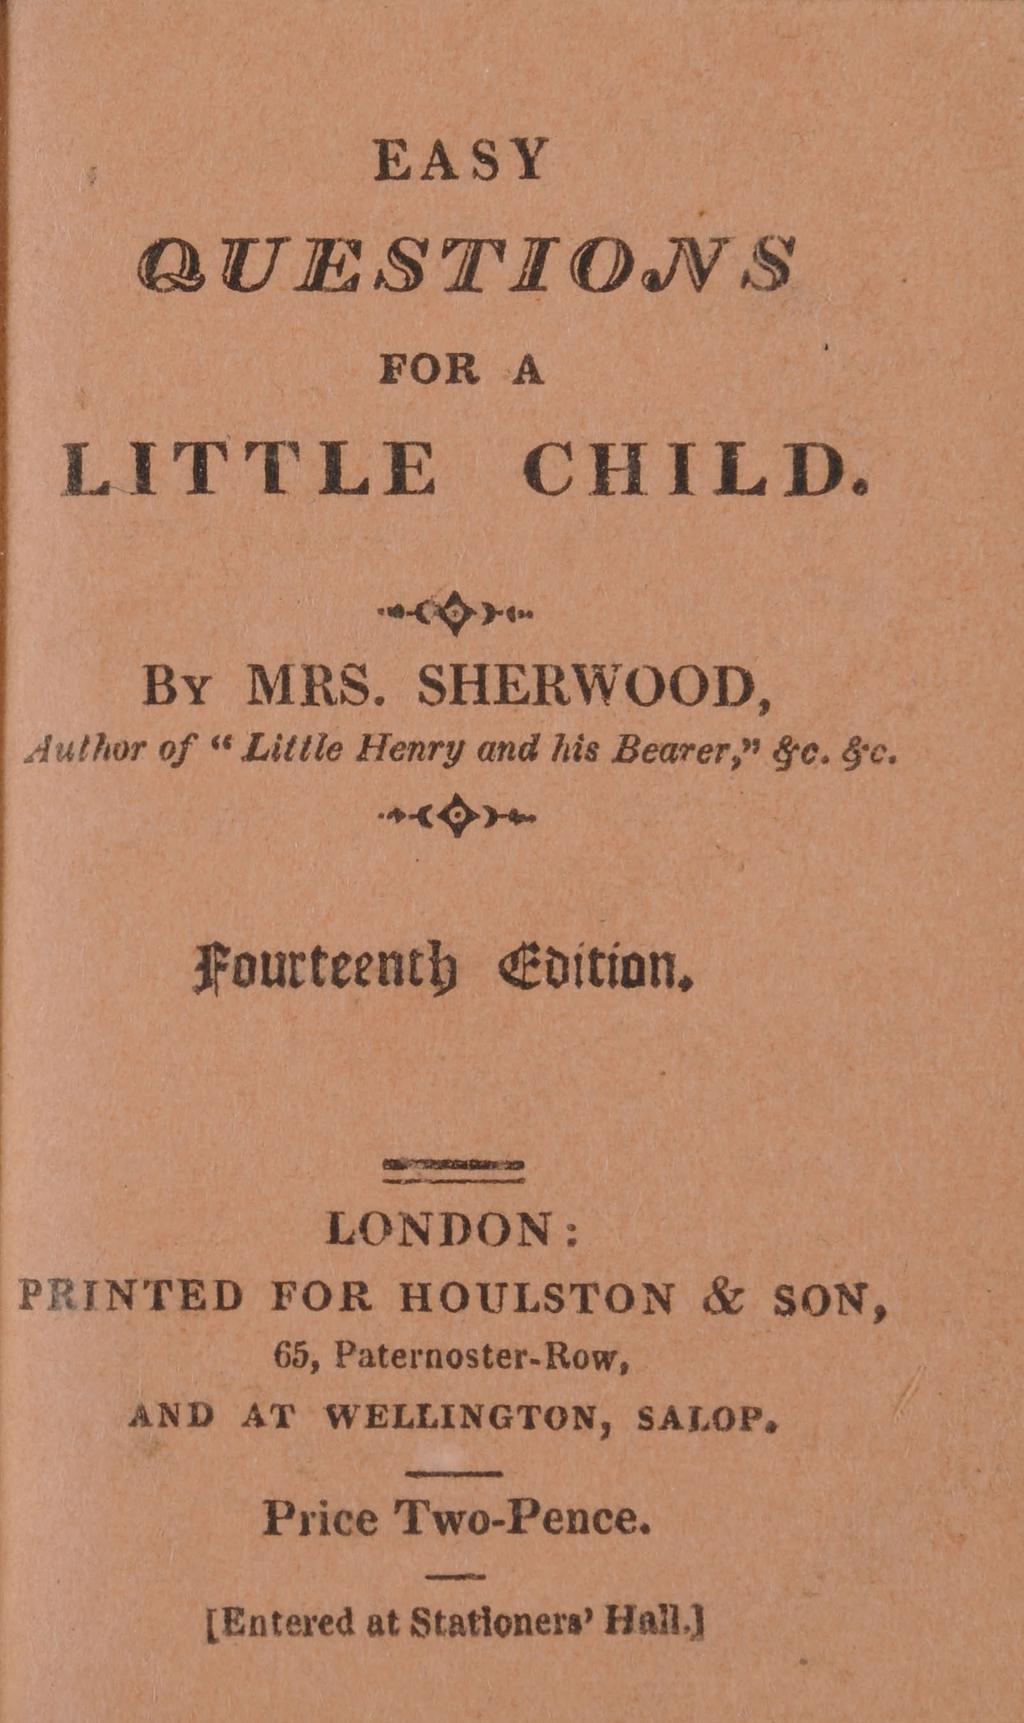 E A SY QUESTIONS FO R A LITTLE CHILD. By MRS. SHERWOOD, Author of " Little Henry and his B e a r e r,"&c. &c. Fourteenth Edition.